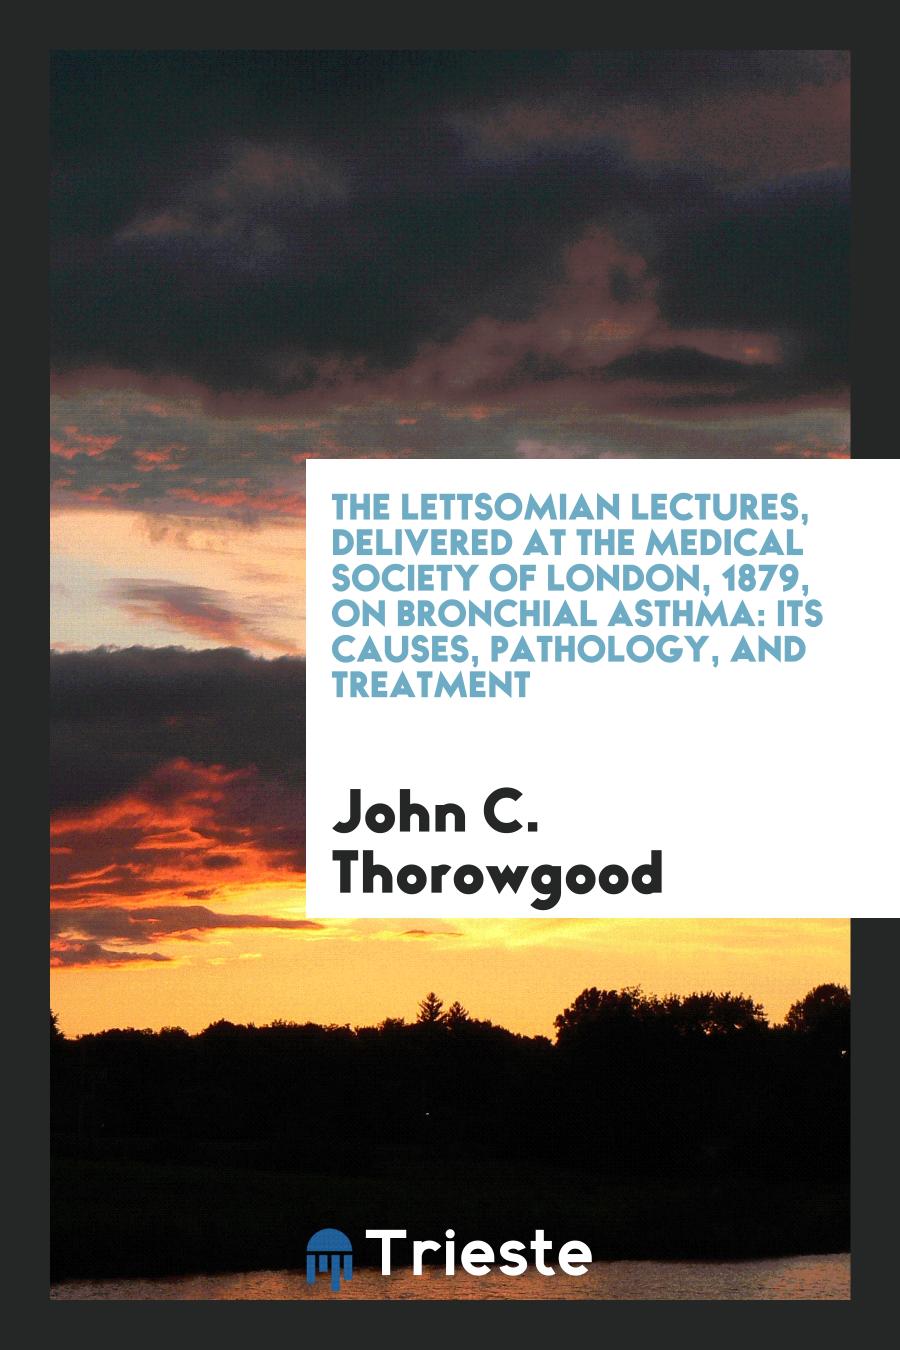 The Lettsomian Lectures, Delivered at the Medical Society of London, 1879, on Bronchial Asthma: Its Causes, Pathology, and Treatment